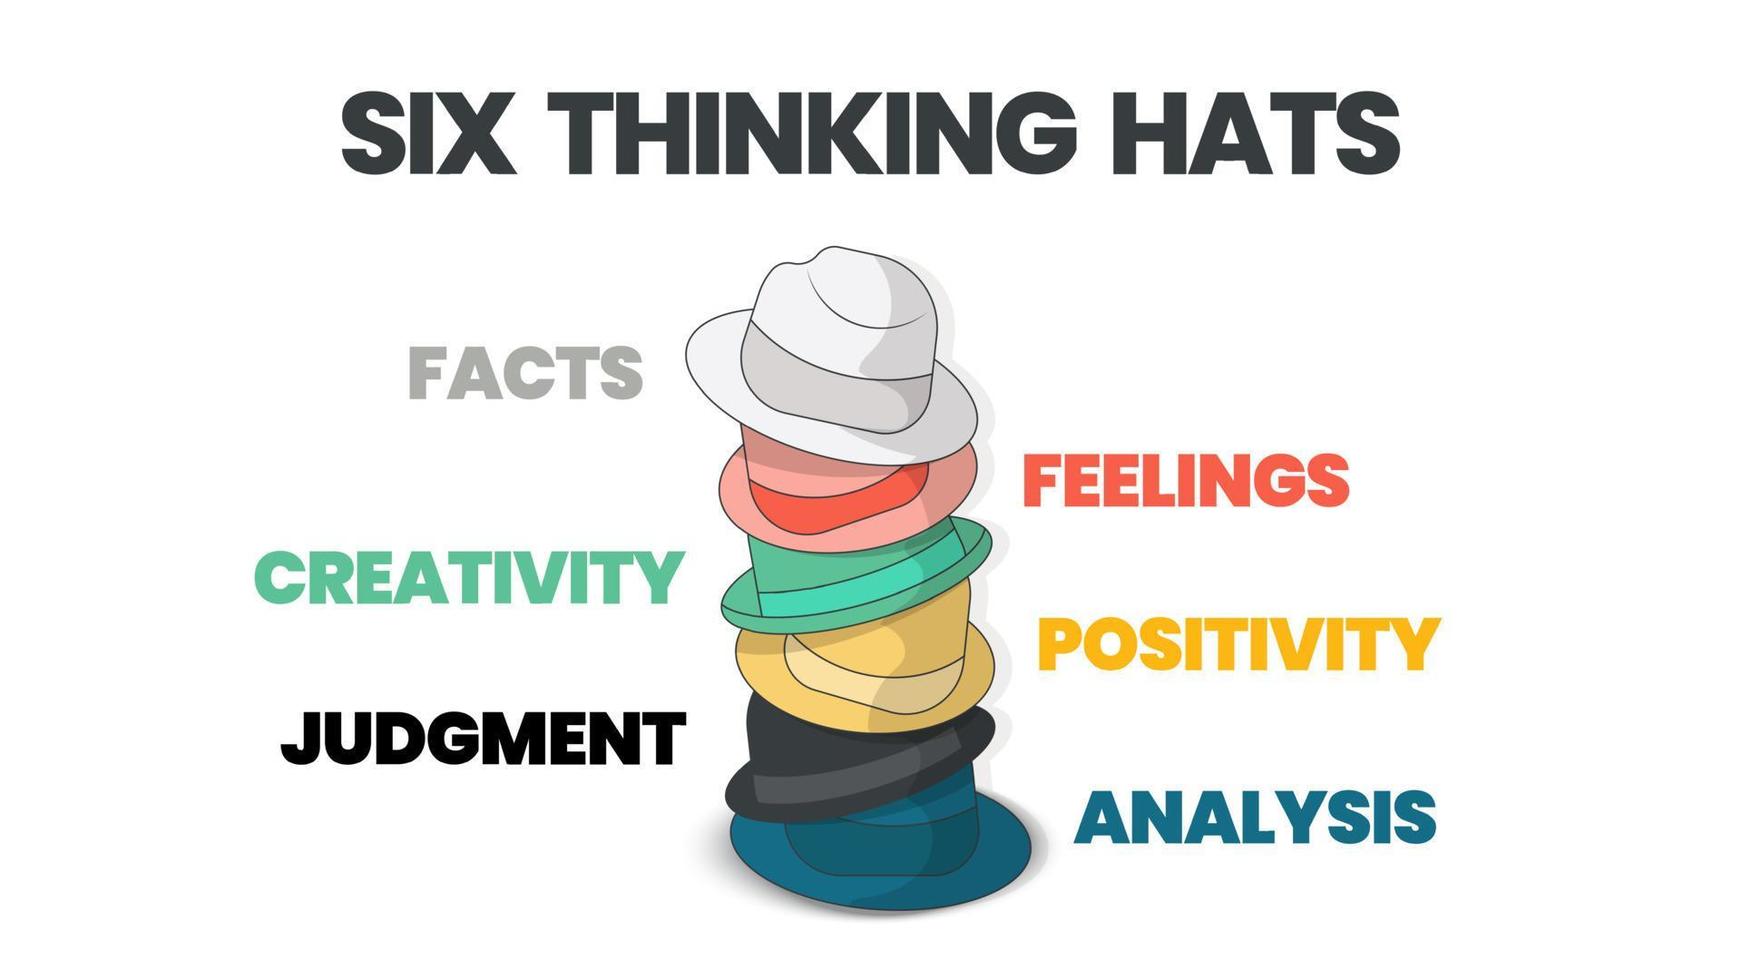 Six thinking hats concepts diagram is illustrated into infographic presentation vector. The picture has 6 elements as colorful hats. Each represents facts, feeling, creativity, judgment, analysis, etc vector